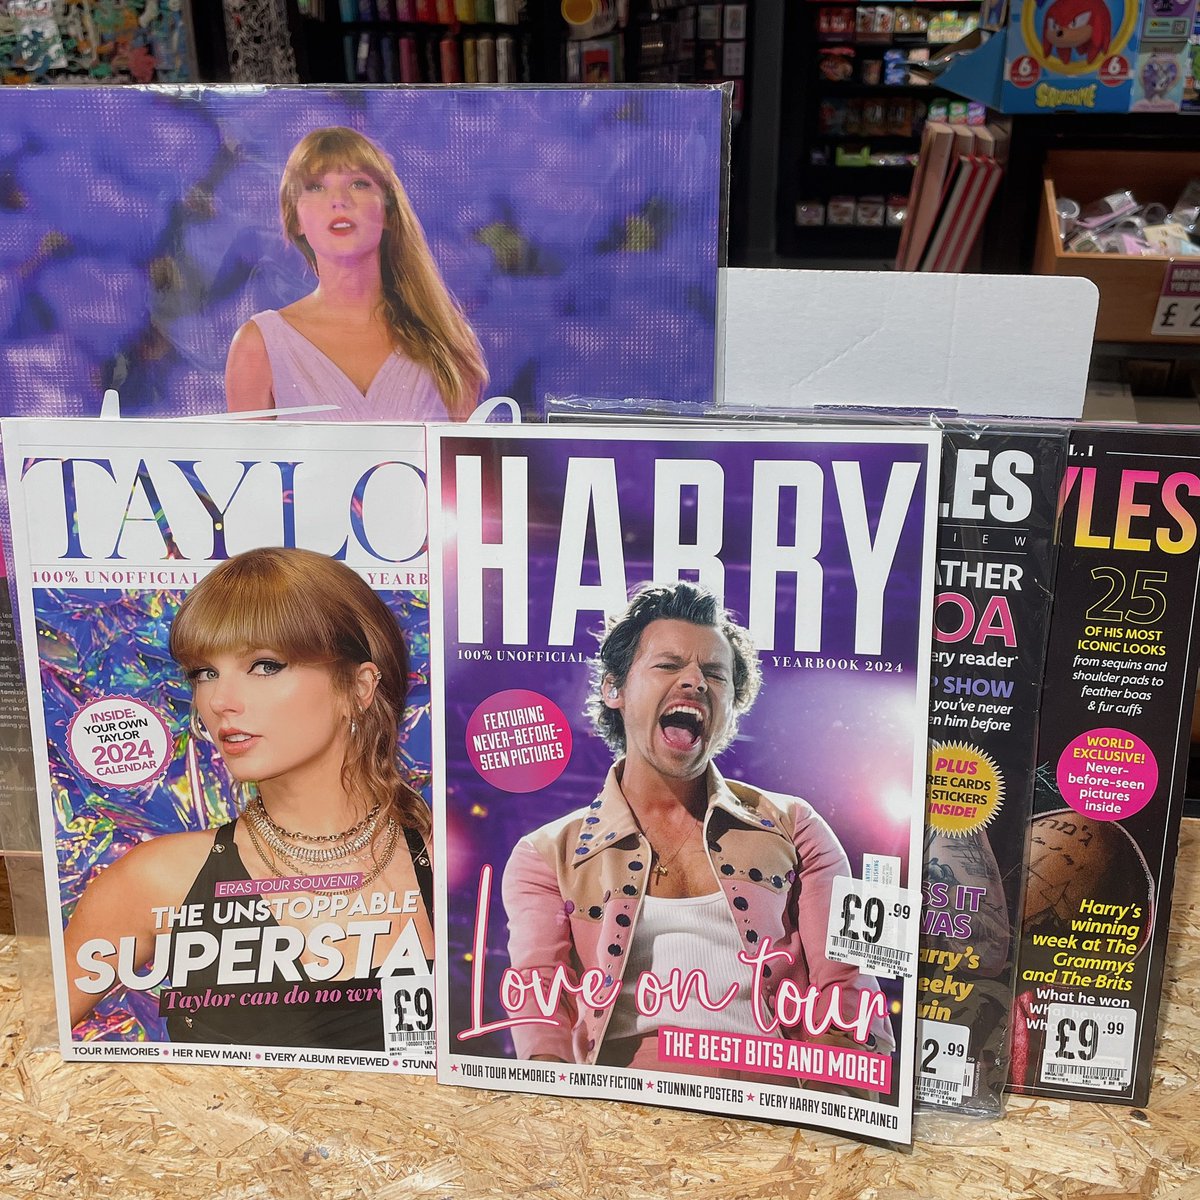 CALLING ALL SWIFTIES AND HARRY STYLES LOVERS 💘 Check out our magazines full of content, pictures and posters! 💓 #hmv #hmvstaines #taylorswift #harrystyles